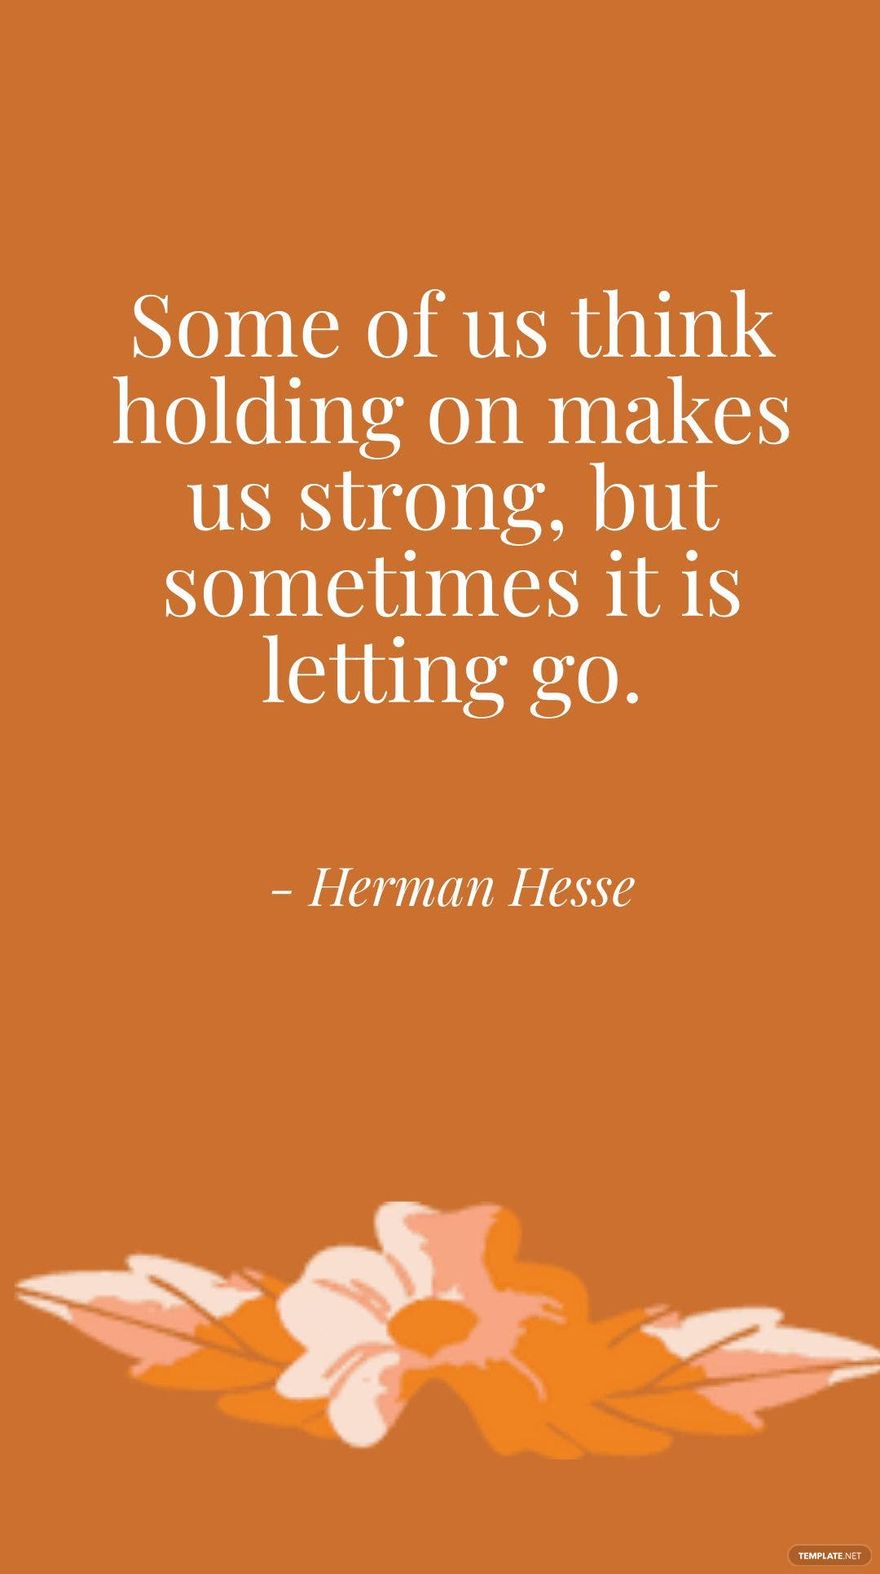 Herman Hesse - Some of us think holding on makes us strong, but sometimes it is letting go.